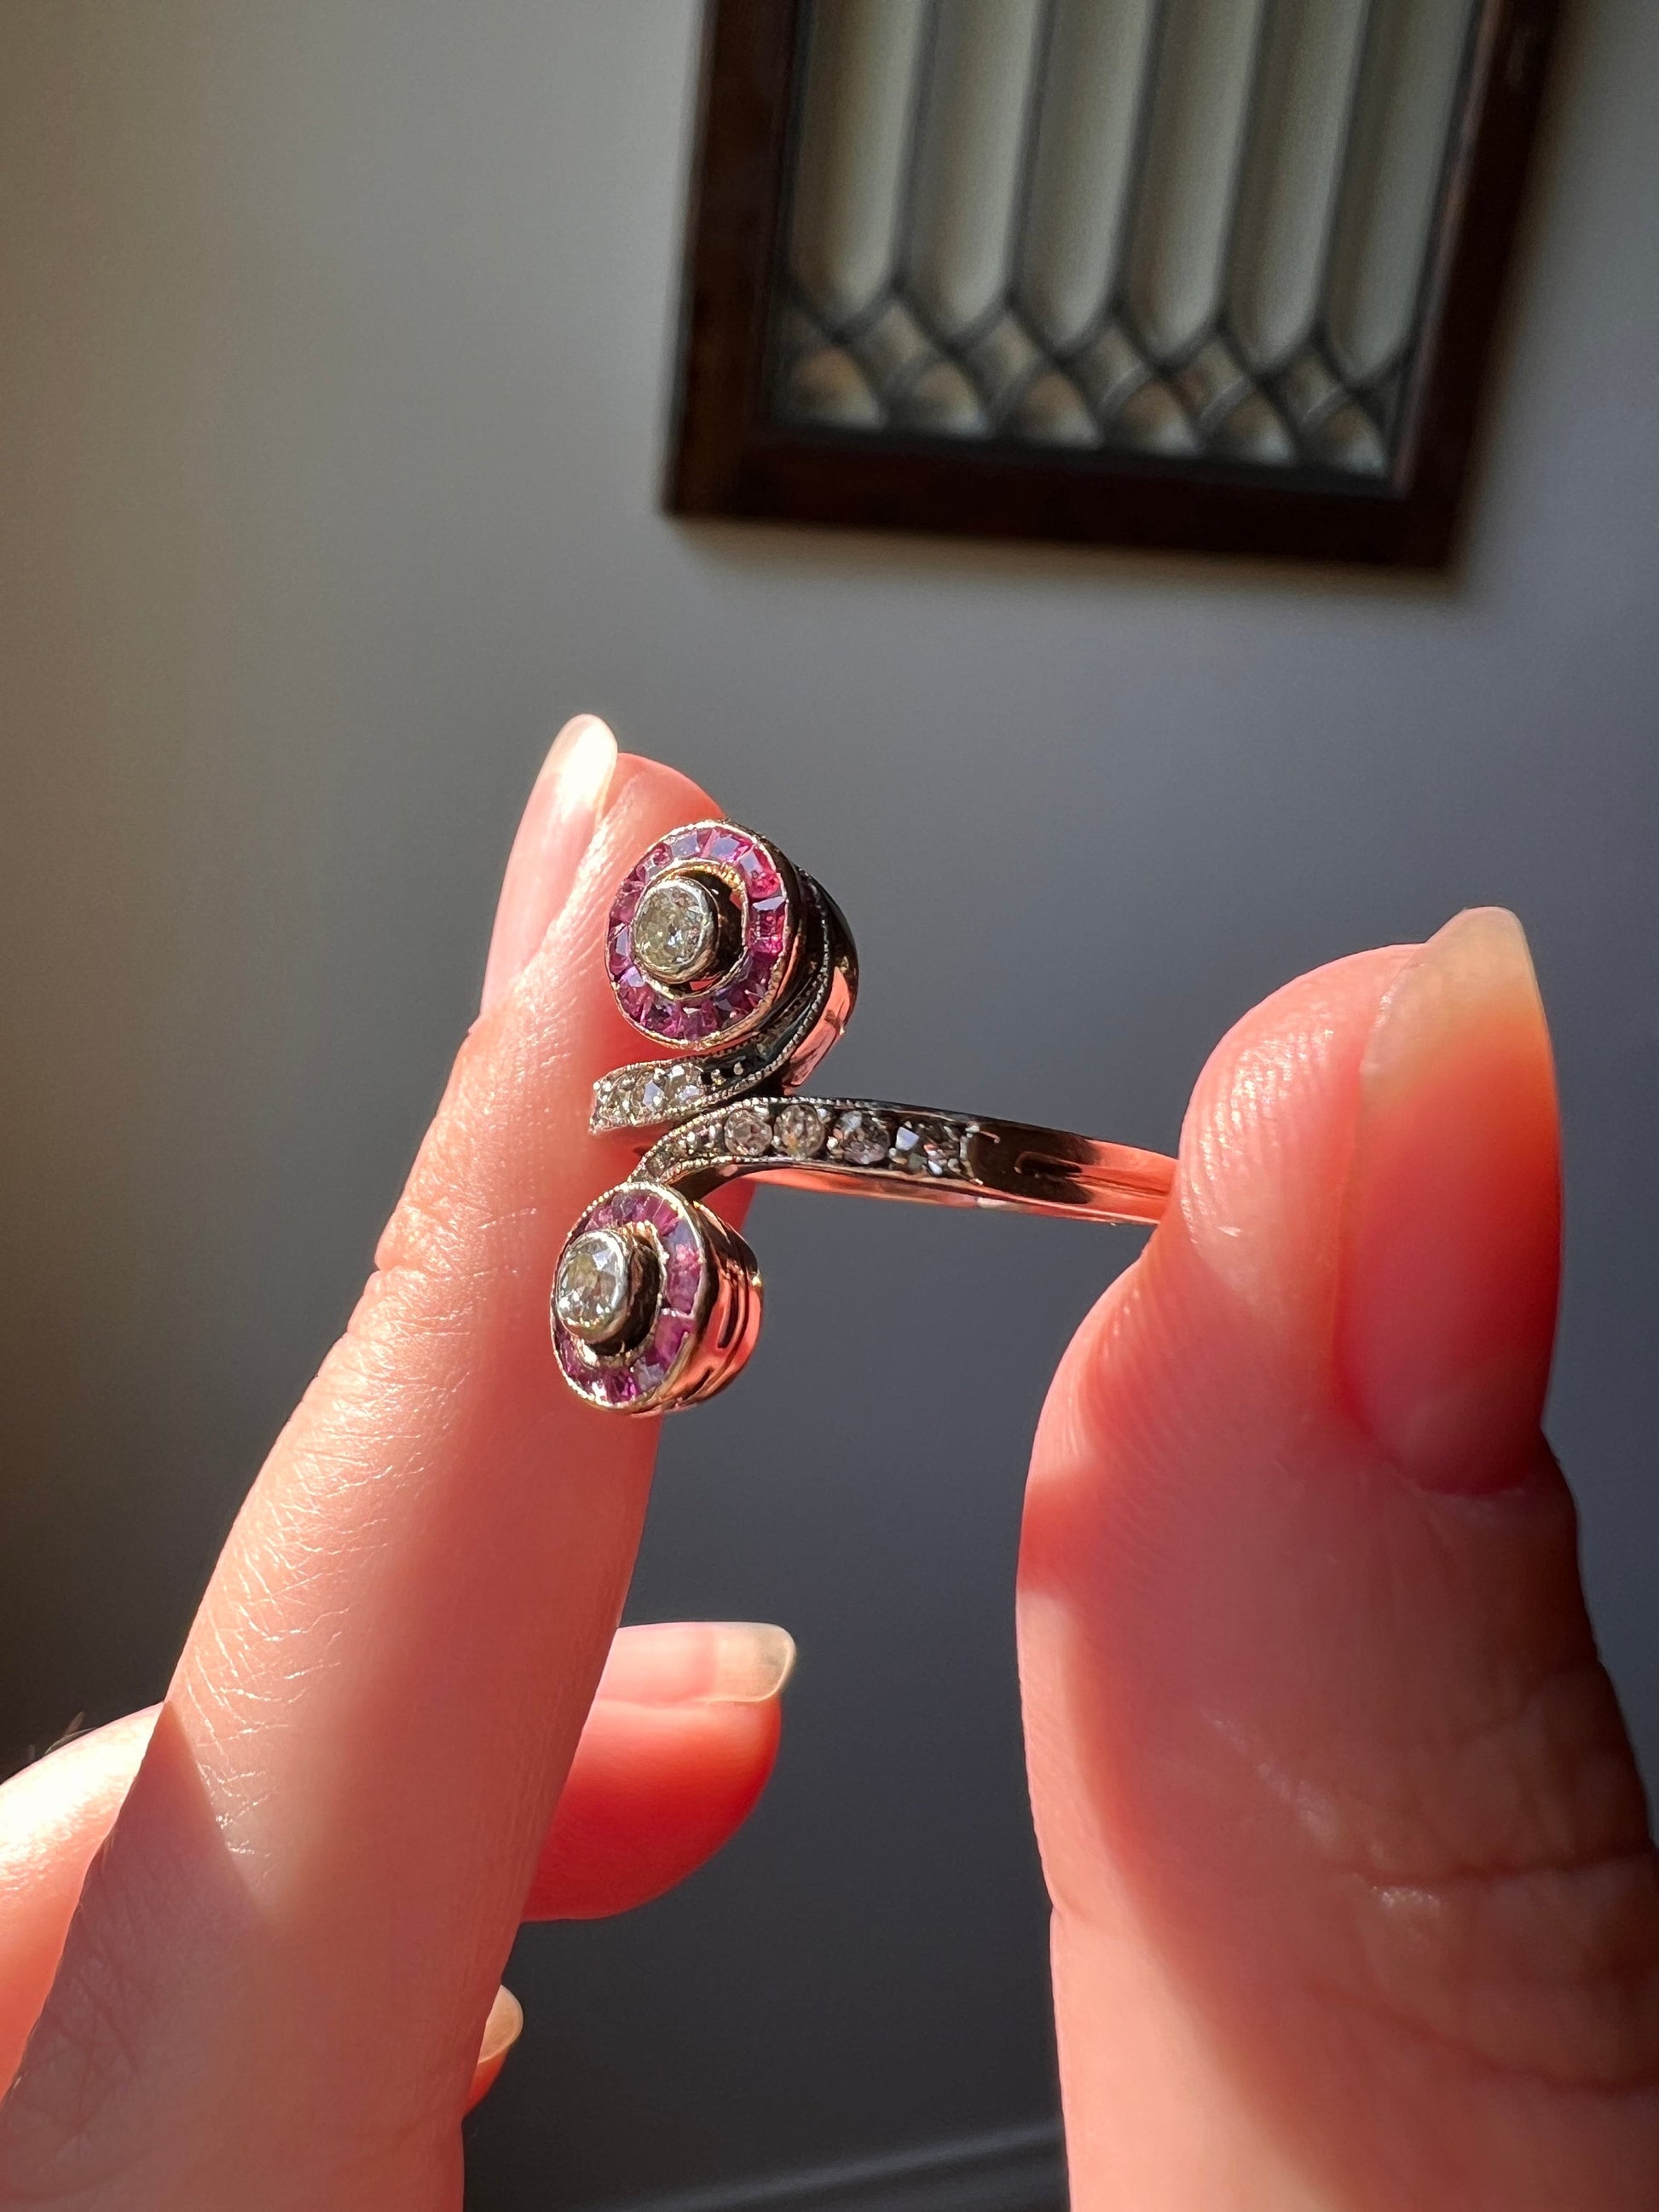 French ANTIQUE Old Mine Cut DIAMOND Toi et Moi Ring Natural Ruby Halo Infinity Swirl 14k Rose Gold Art Nouveau Victorian Romantic Gift OmC